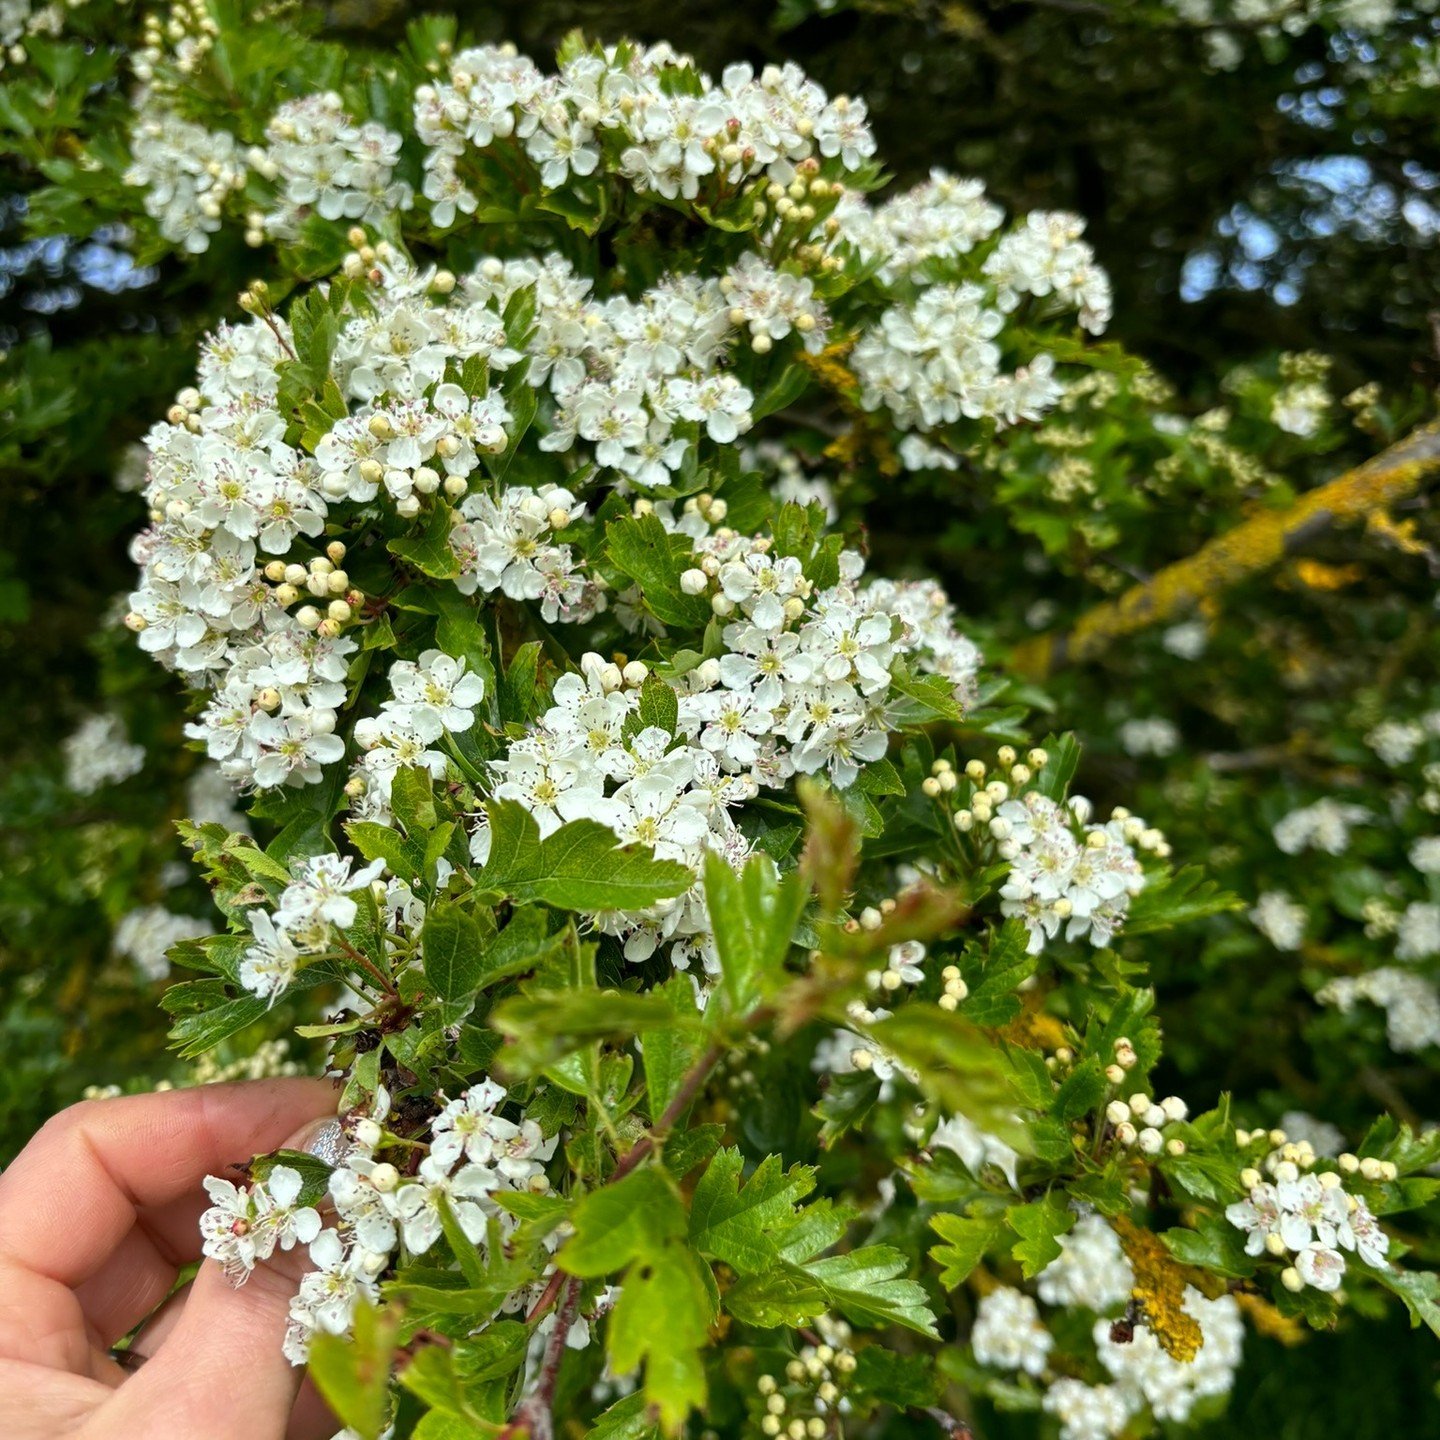 This is heart medicine 🌸

For The heart (physical) / Heart (emotional)... Now is the time to gather the Hawthorn blossom and leaves in the warmth of the sunshine.

One of my all-time favourite tinctures is made with Hawthorn leaves and flowers, whic